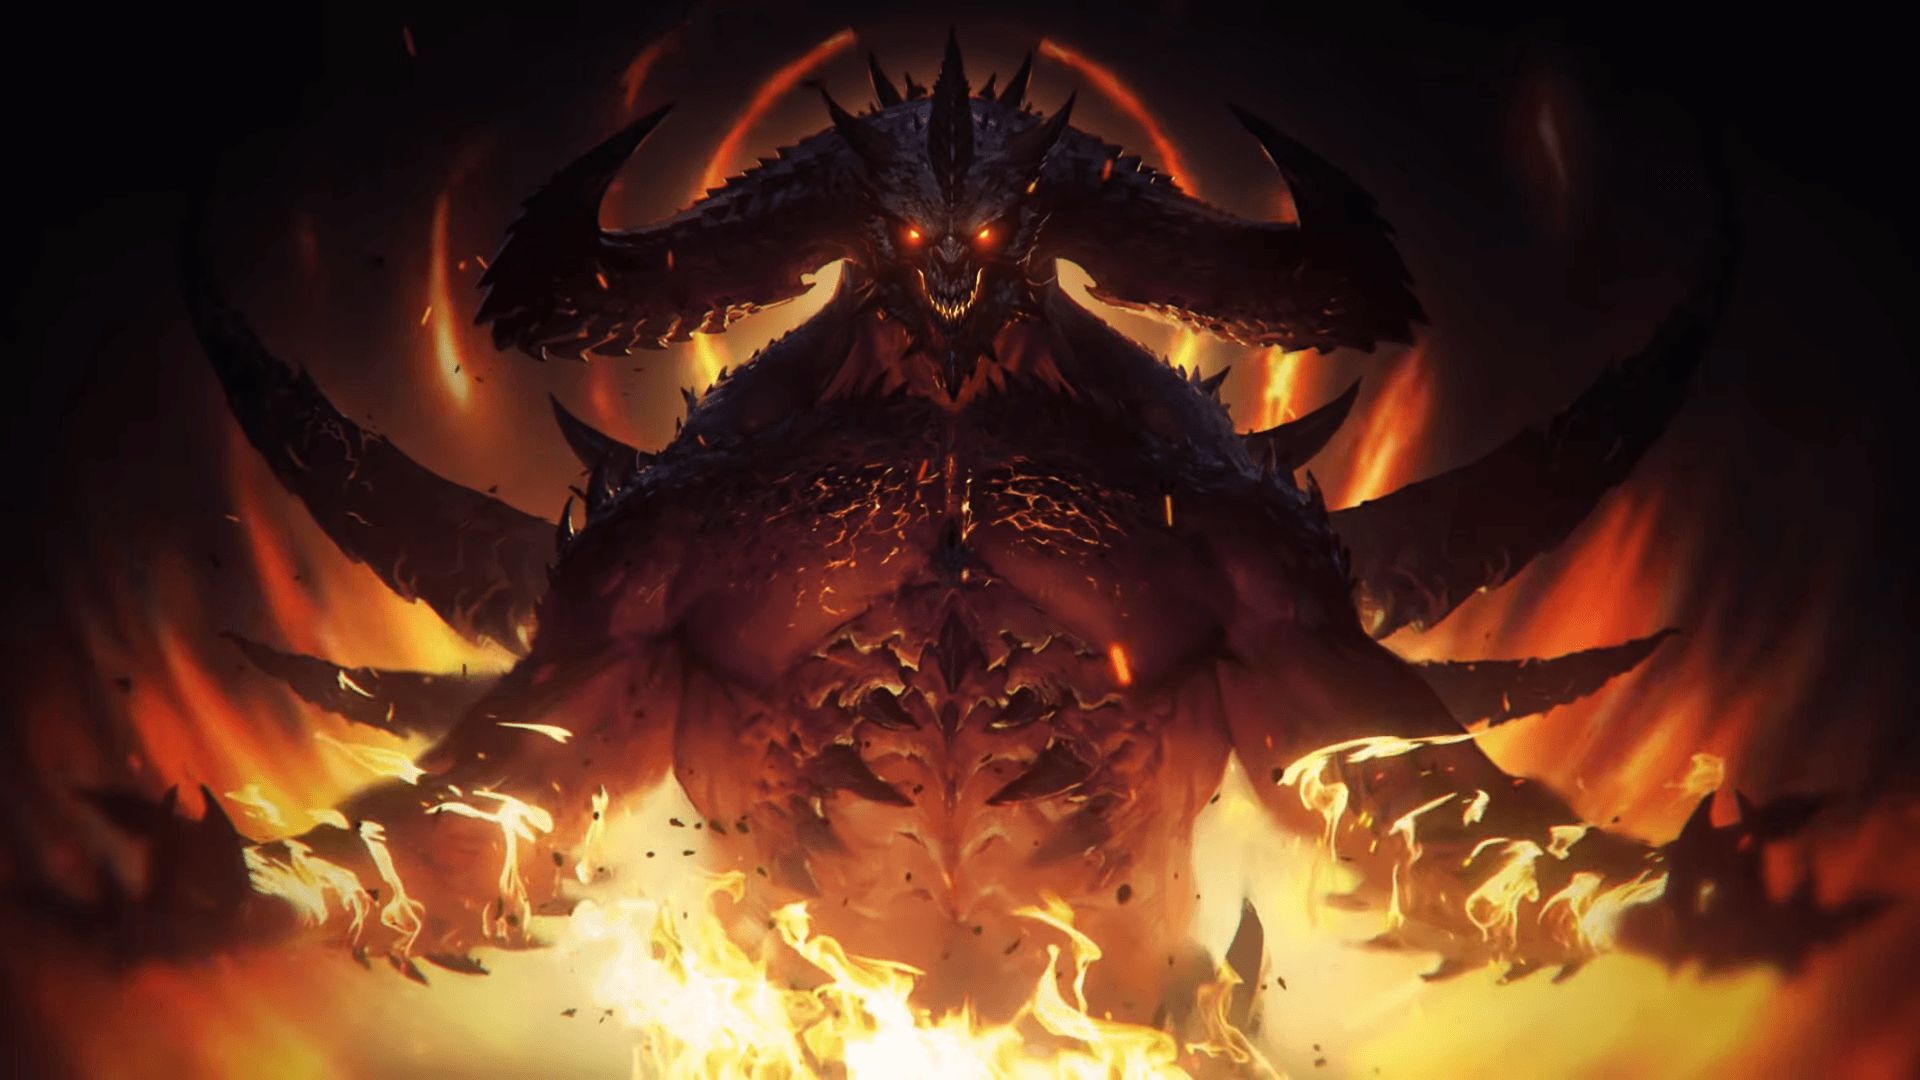 This is Diablo Immortal on both PC and mobile phone